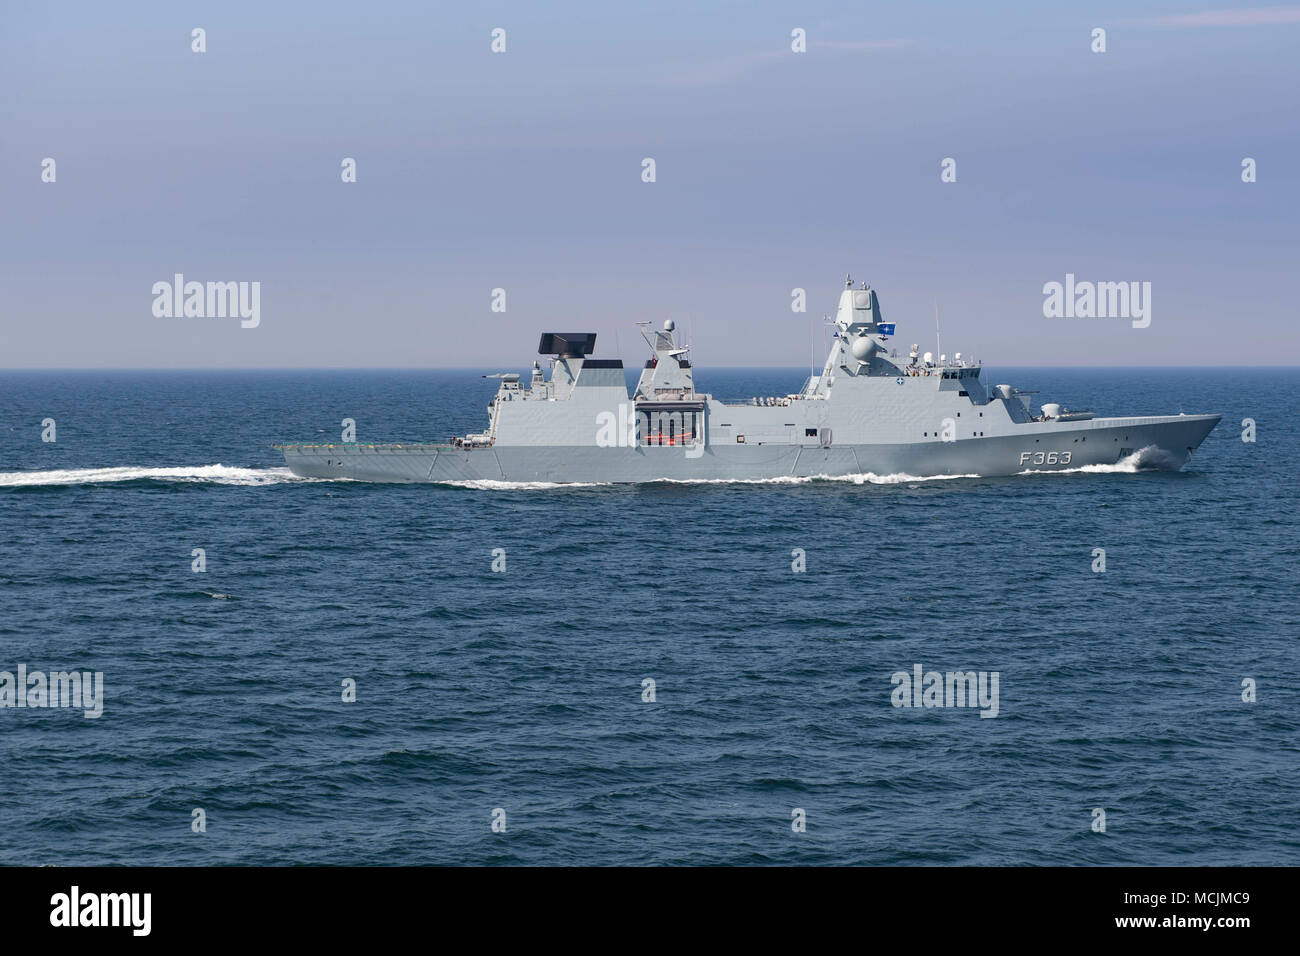 180414-N-JI086-082 DANISH STRAITS (April 14, 2018) The Danish Iver Huitfeldt-class frigate HMDS Niels Juel (F 363) transits the Danish Straits, April 14, 2018. Porter, forward-deployed to Rota, Spain, is on its fifth patrol in the U.S. 6th Fleet area of operations in support of U.S. national security interests in Europe. (U.S. Navy photo by Mass Communication Specialist 3rd Class Ford Williams/Released) Stock Photo